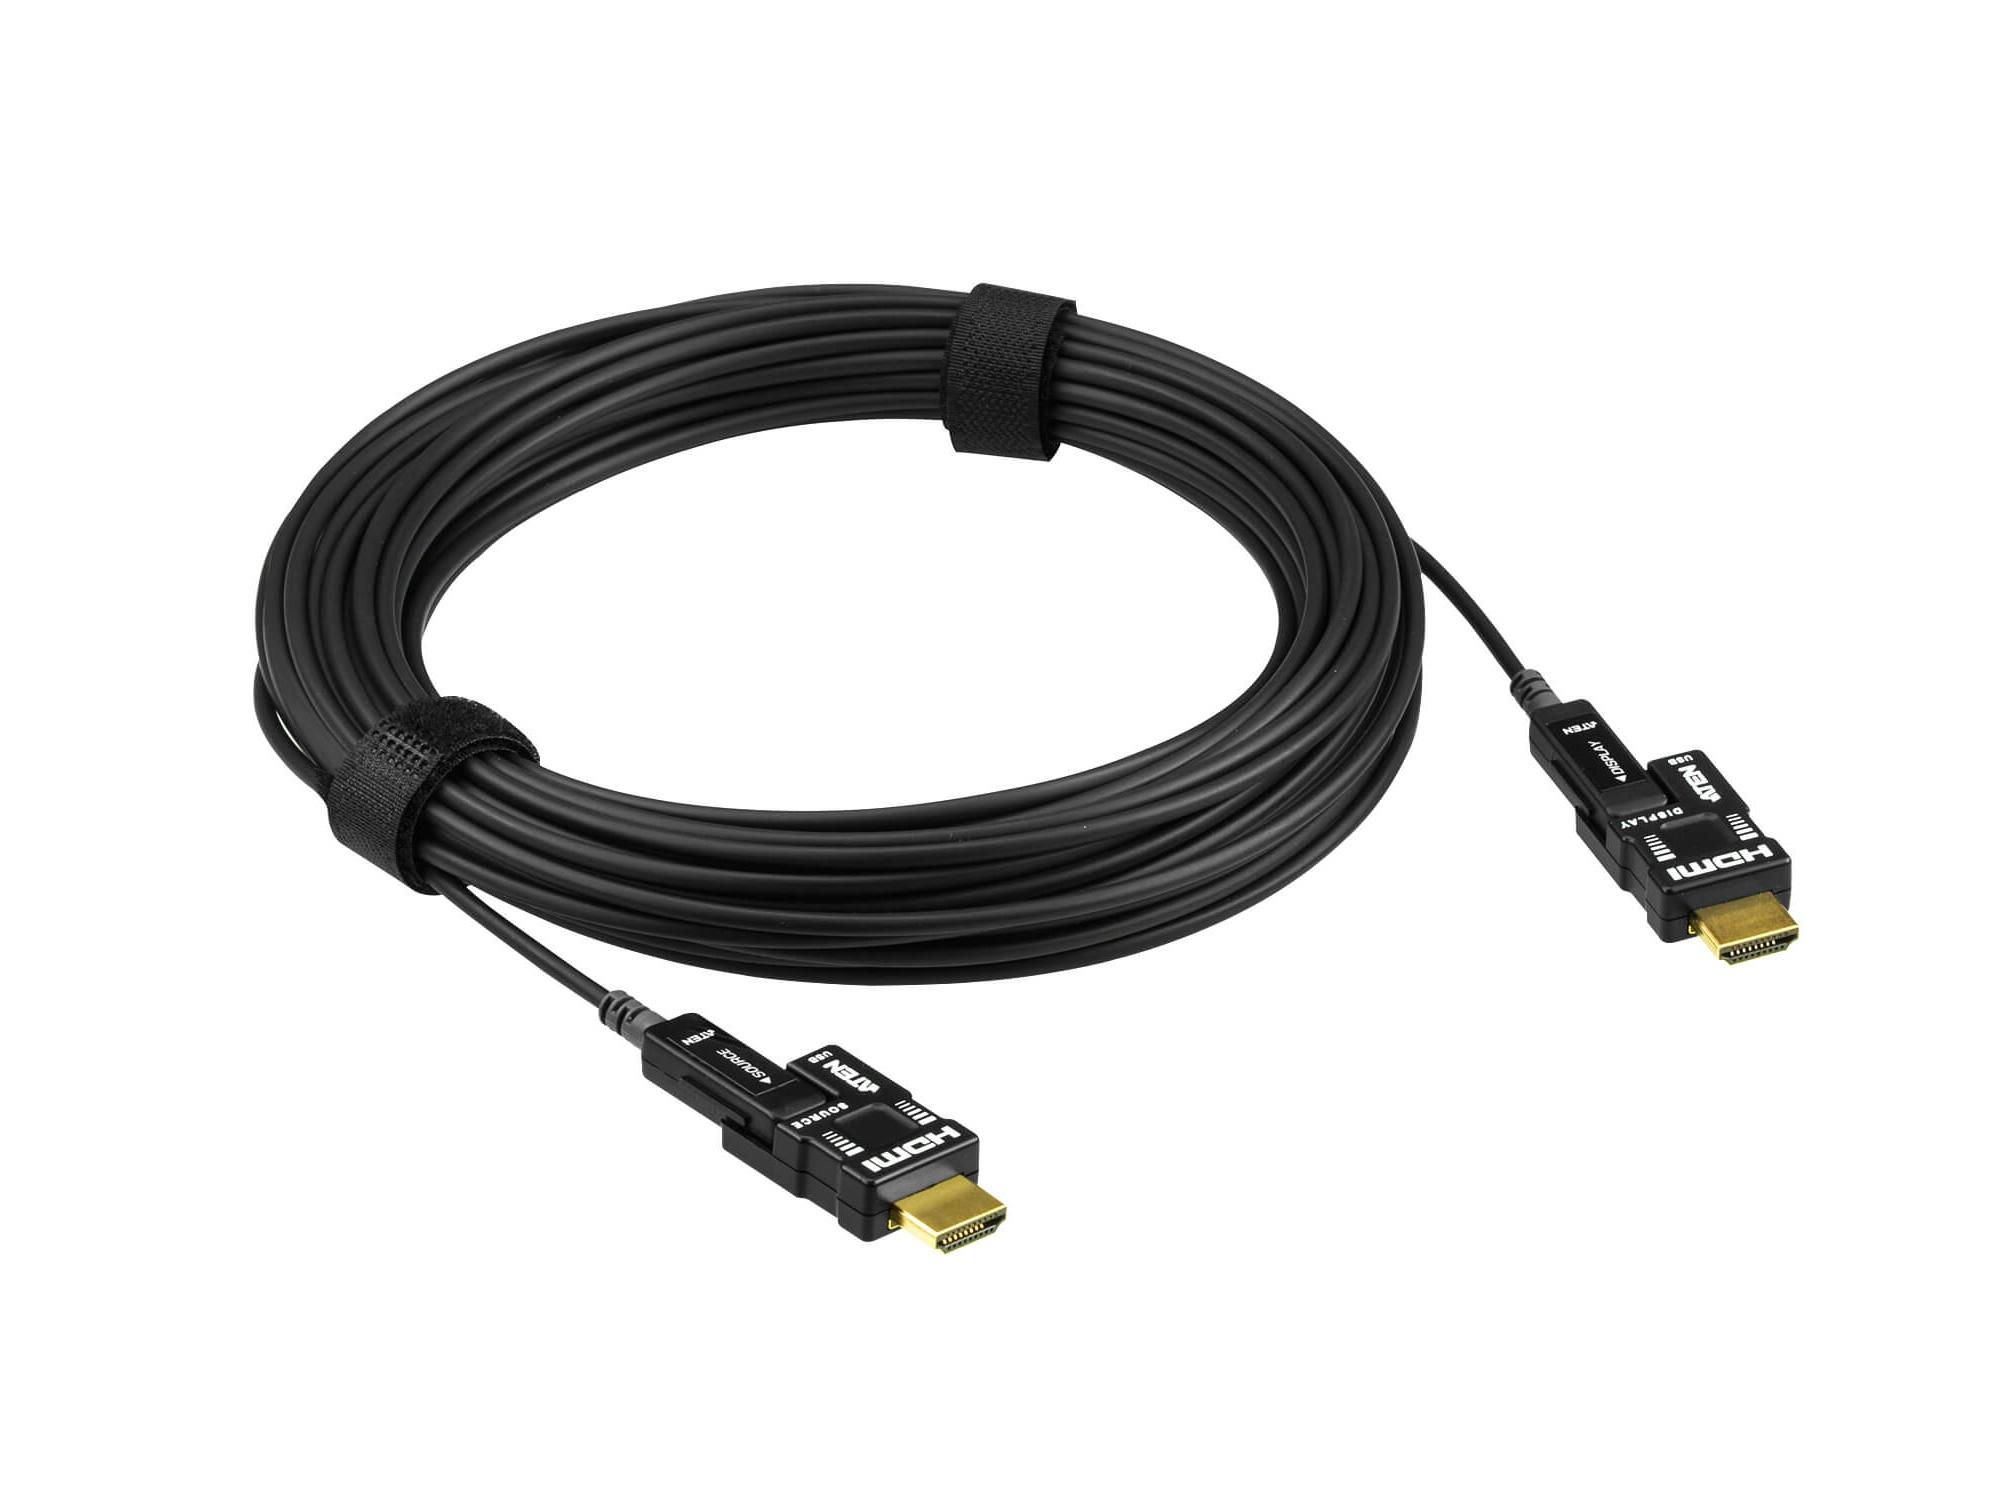 VE7833 30m True 4K HDMI 2.0 Active Optical Cable by Aten